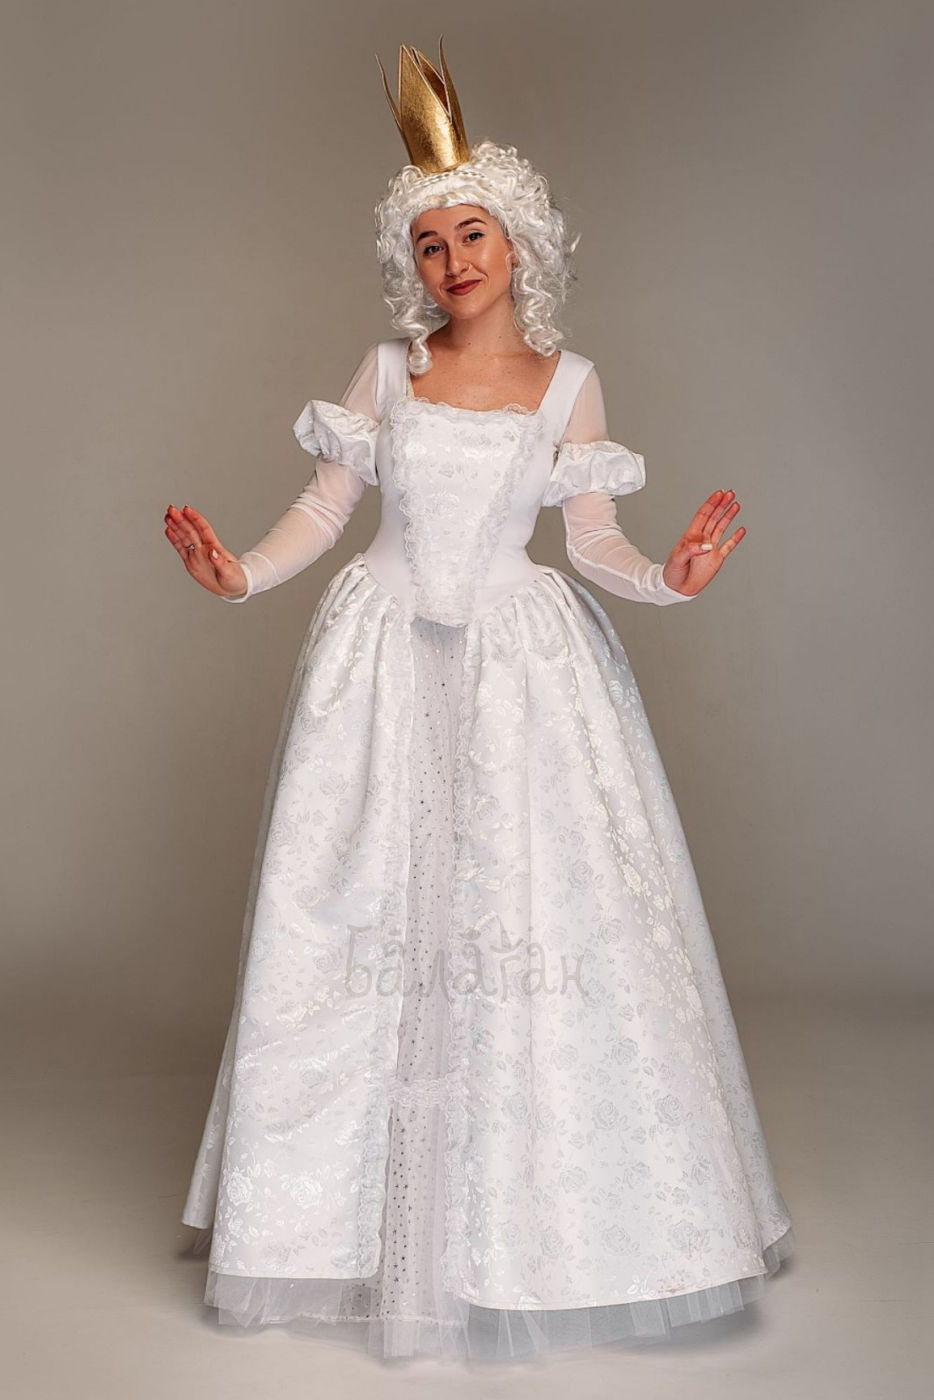 Costume of the White Queen